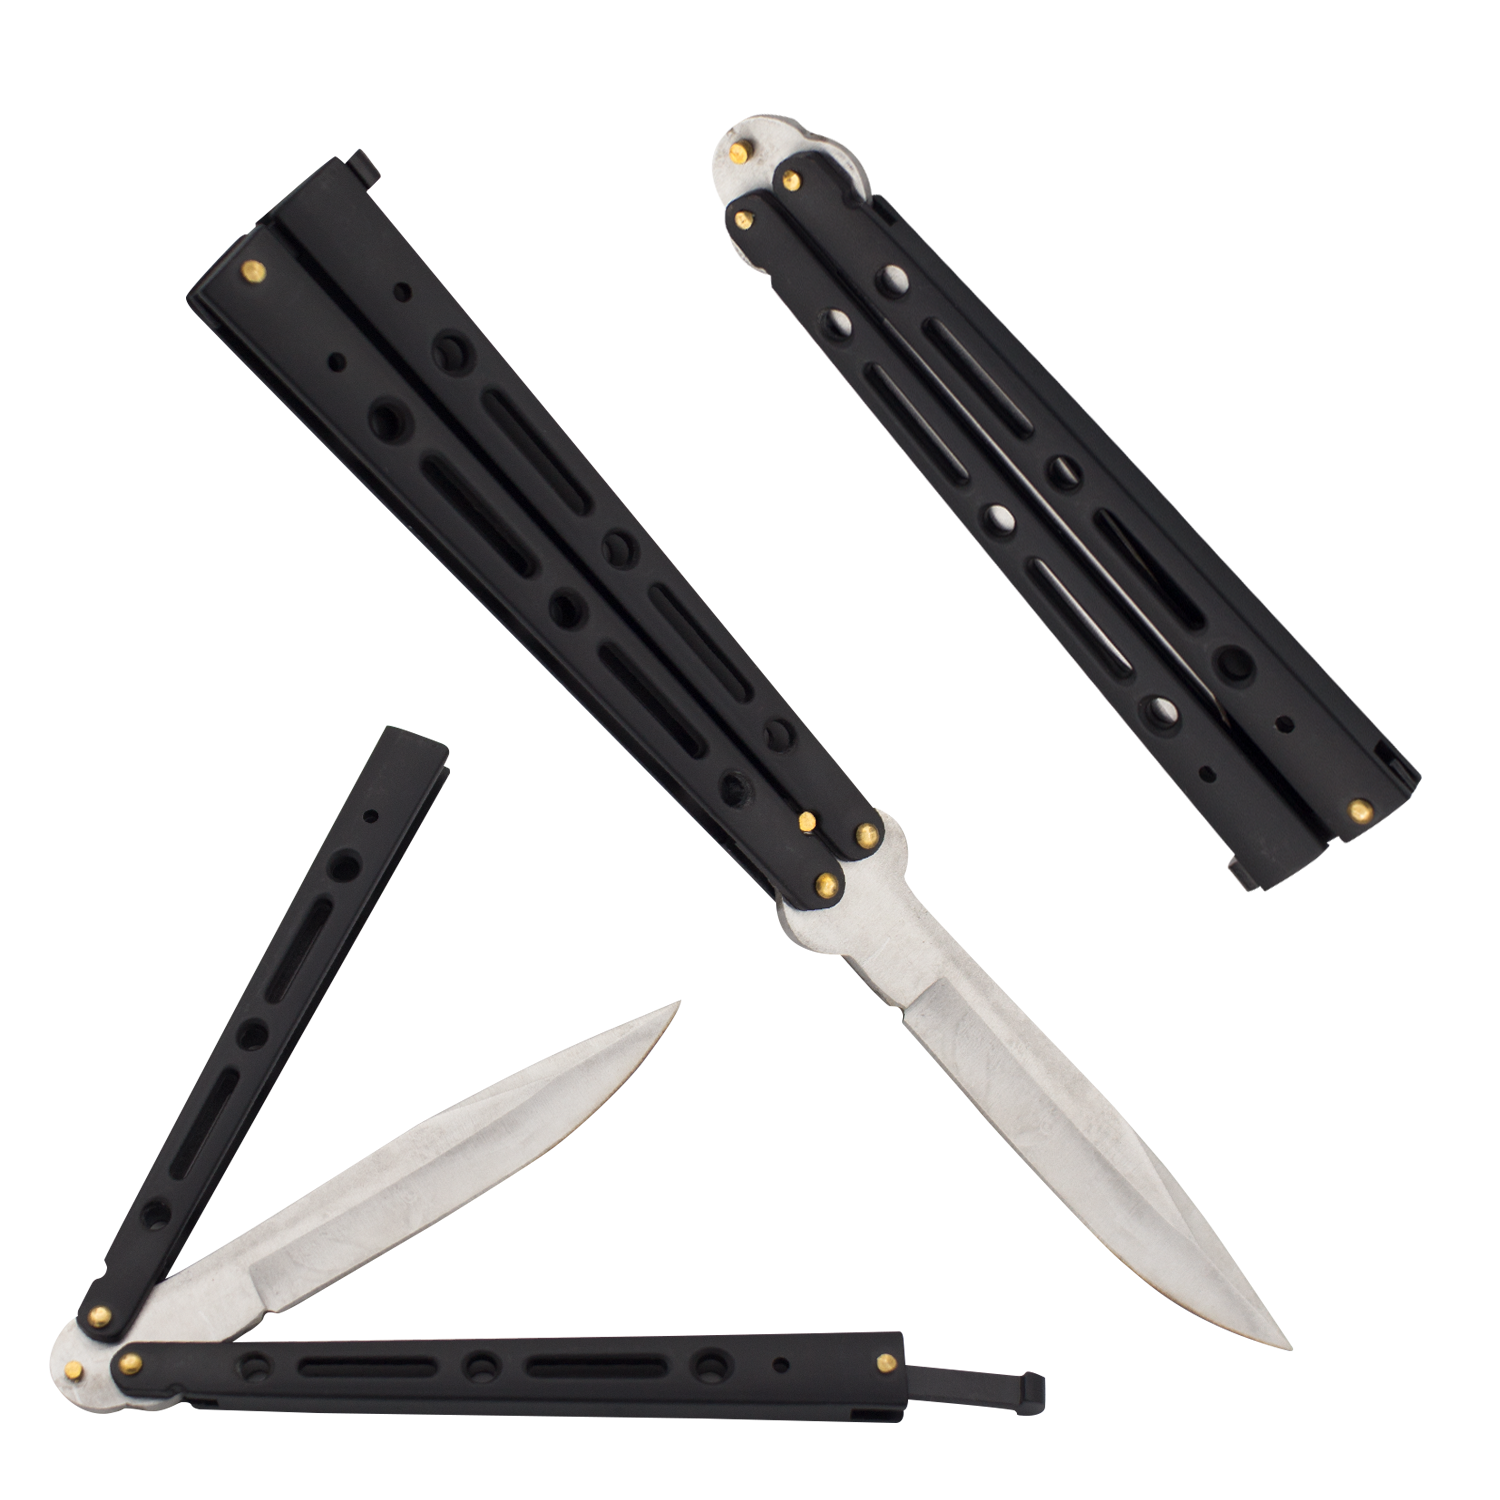 Heavy Duty Balisong Butterfly Knife Gold – Panther Wholesale